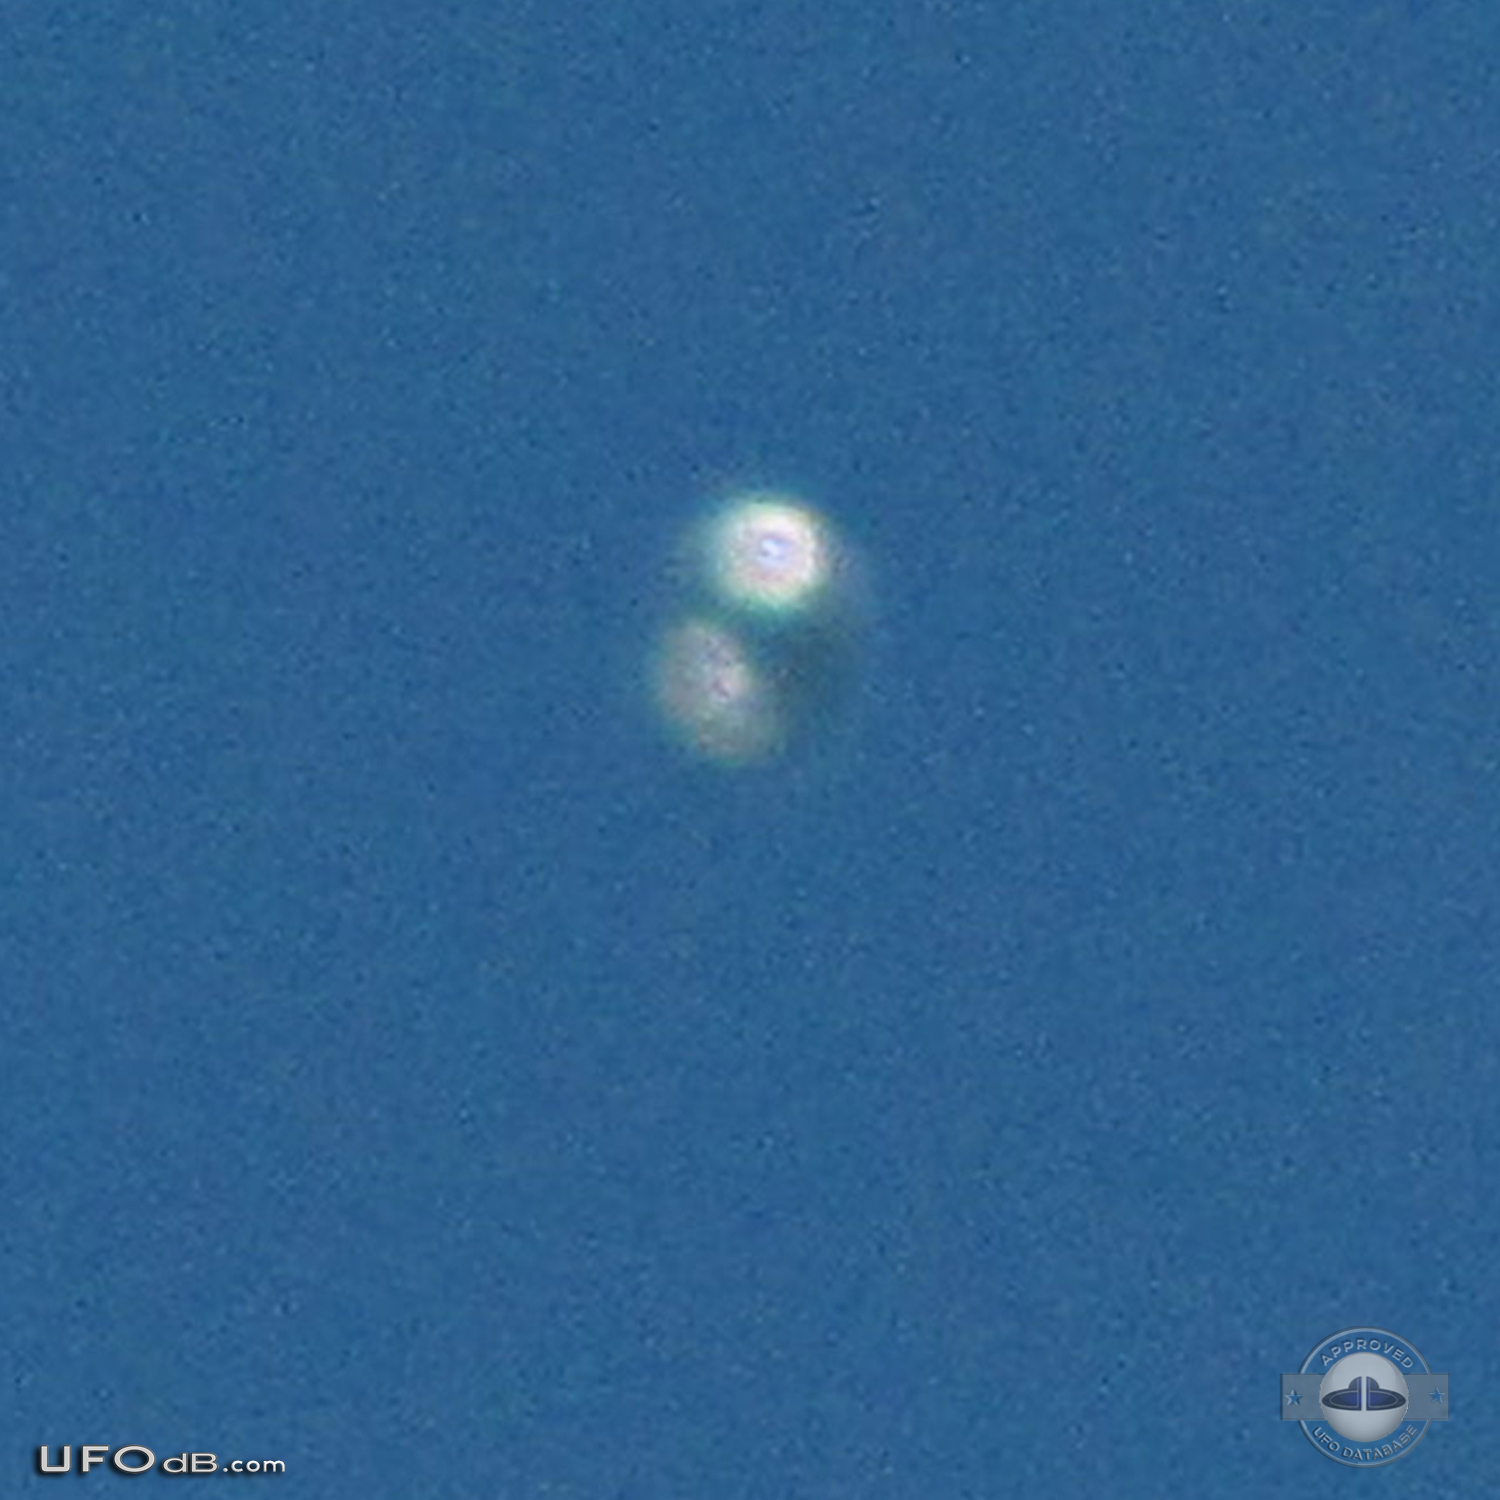 Donut shaped UFO with glowing silver material over Scituate Ma US 2012 UFO Picture #481-5